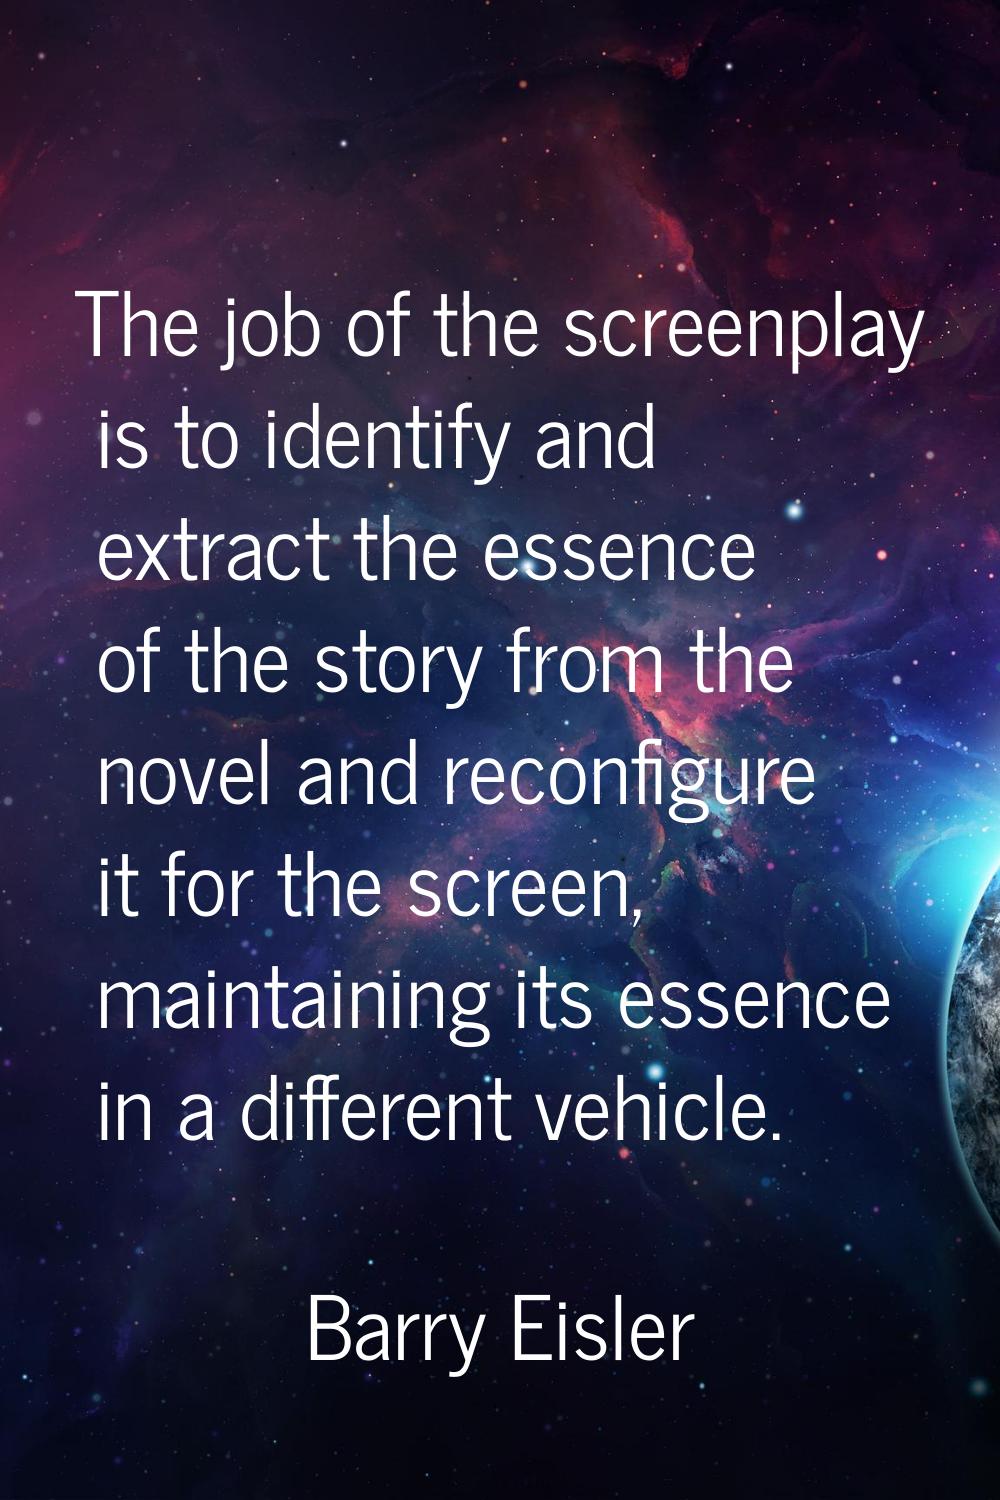 The job of the screenplay is to identify and extract the essence of the story from the novel and re